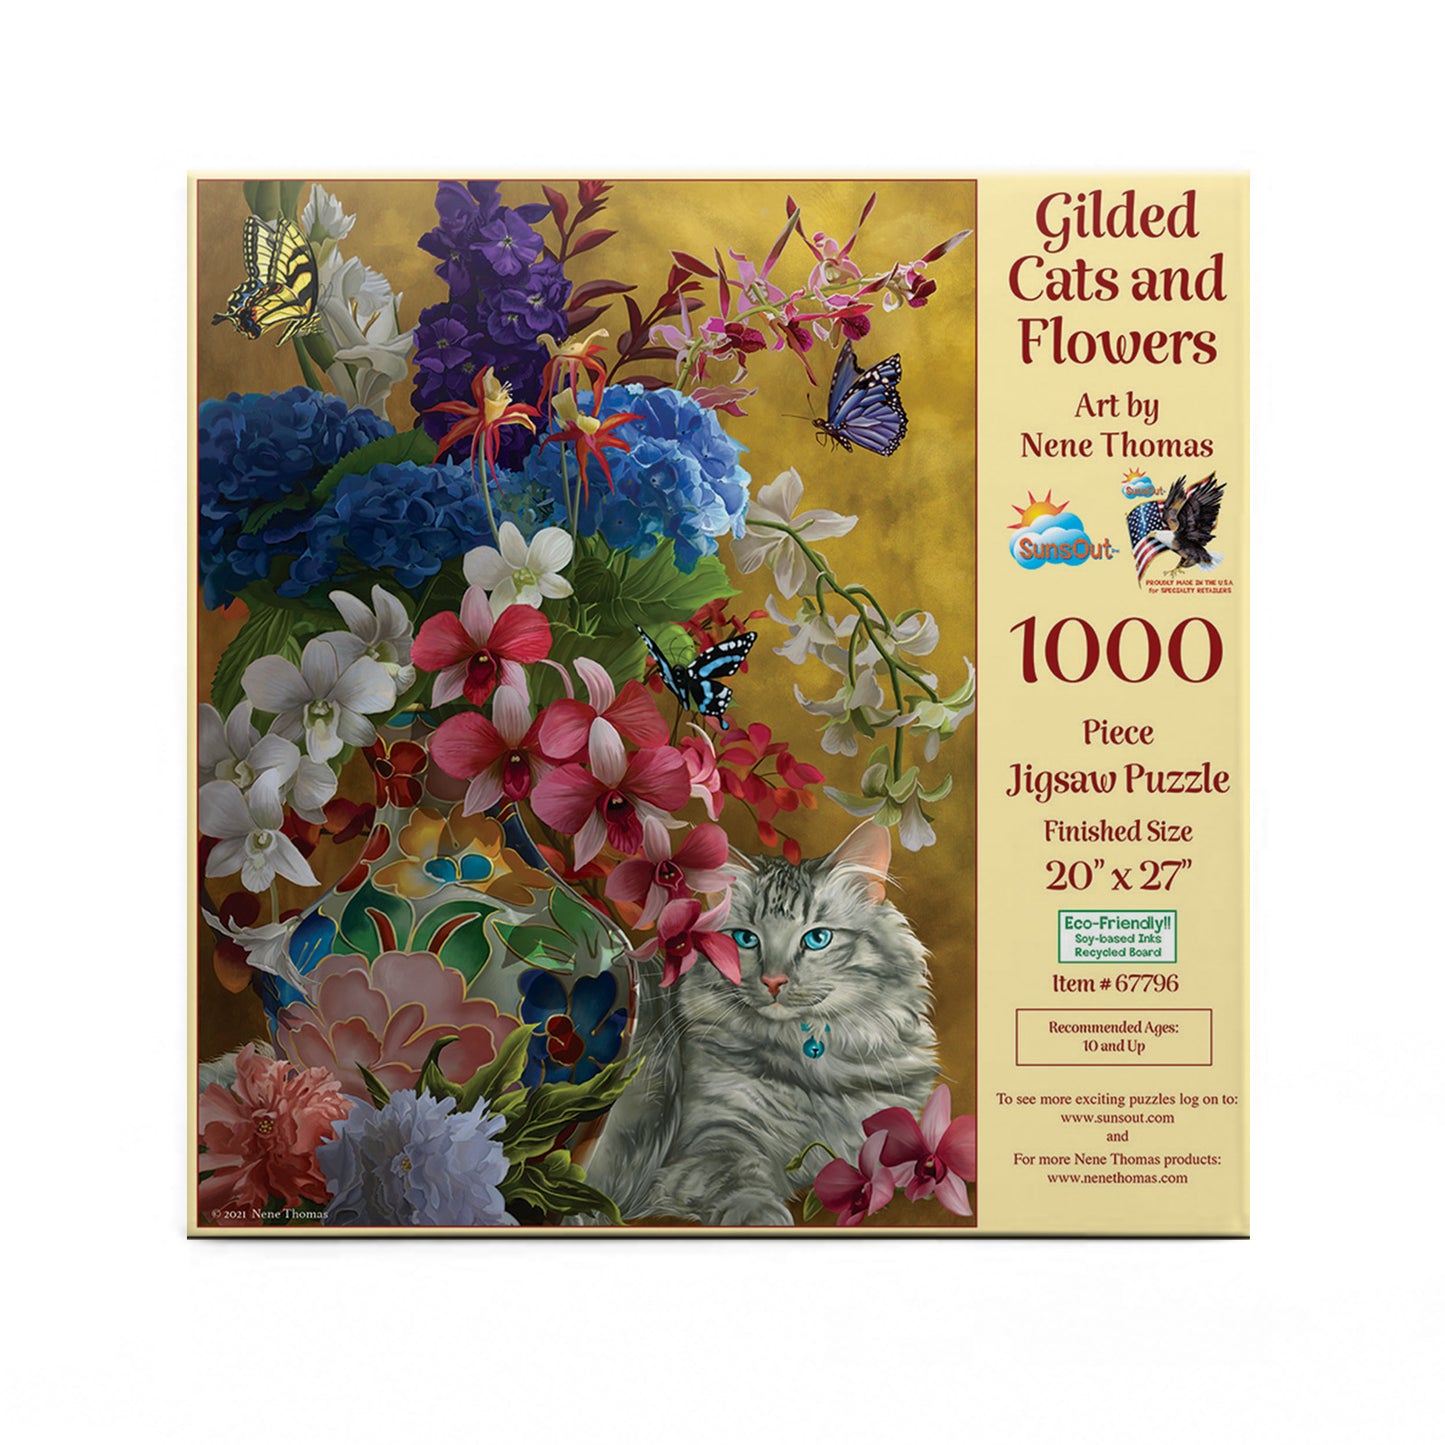 Gilded Cats And Flowers - 1000 Piece Jigsaw Puzzle